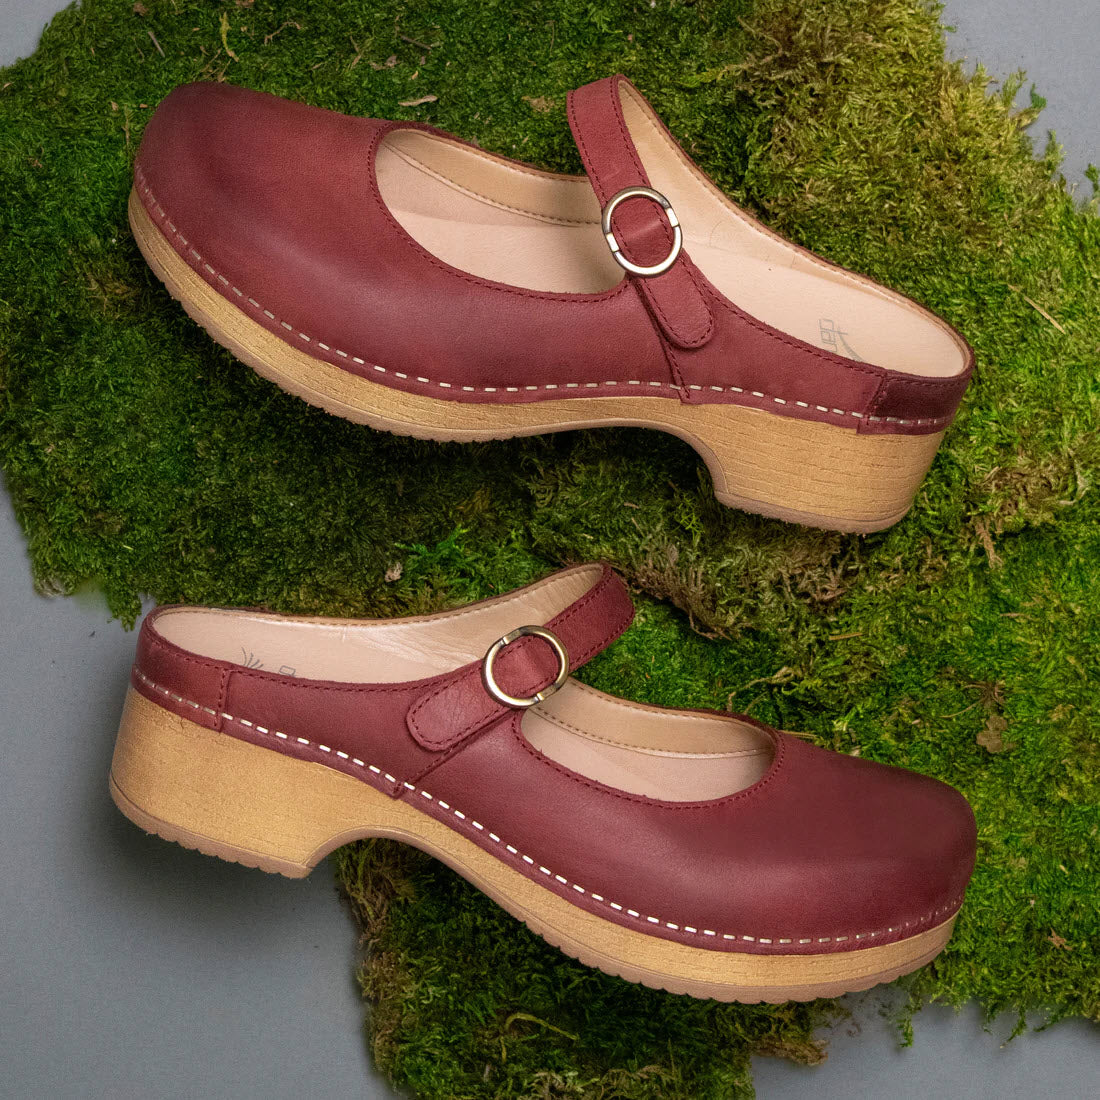 A pair of maroon Dansko Bria Cinnabar Mary Jane clog mules with buckle straps, displayed on a green mossy surface.